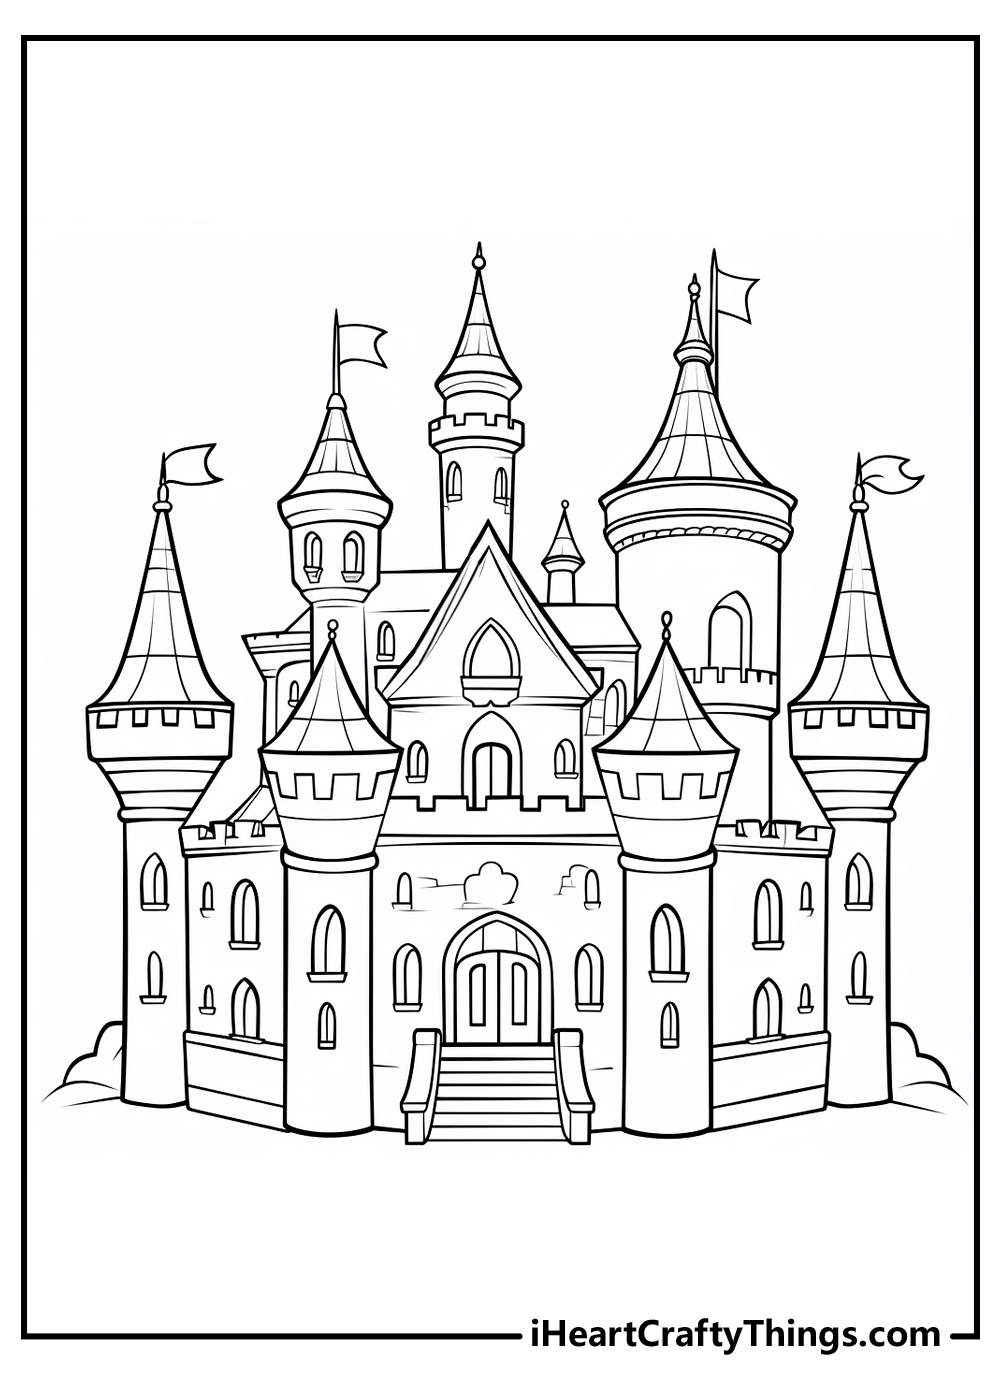 Castle Coloring Pages for Kids